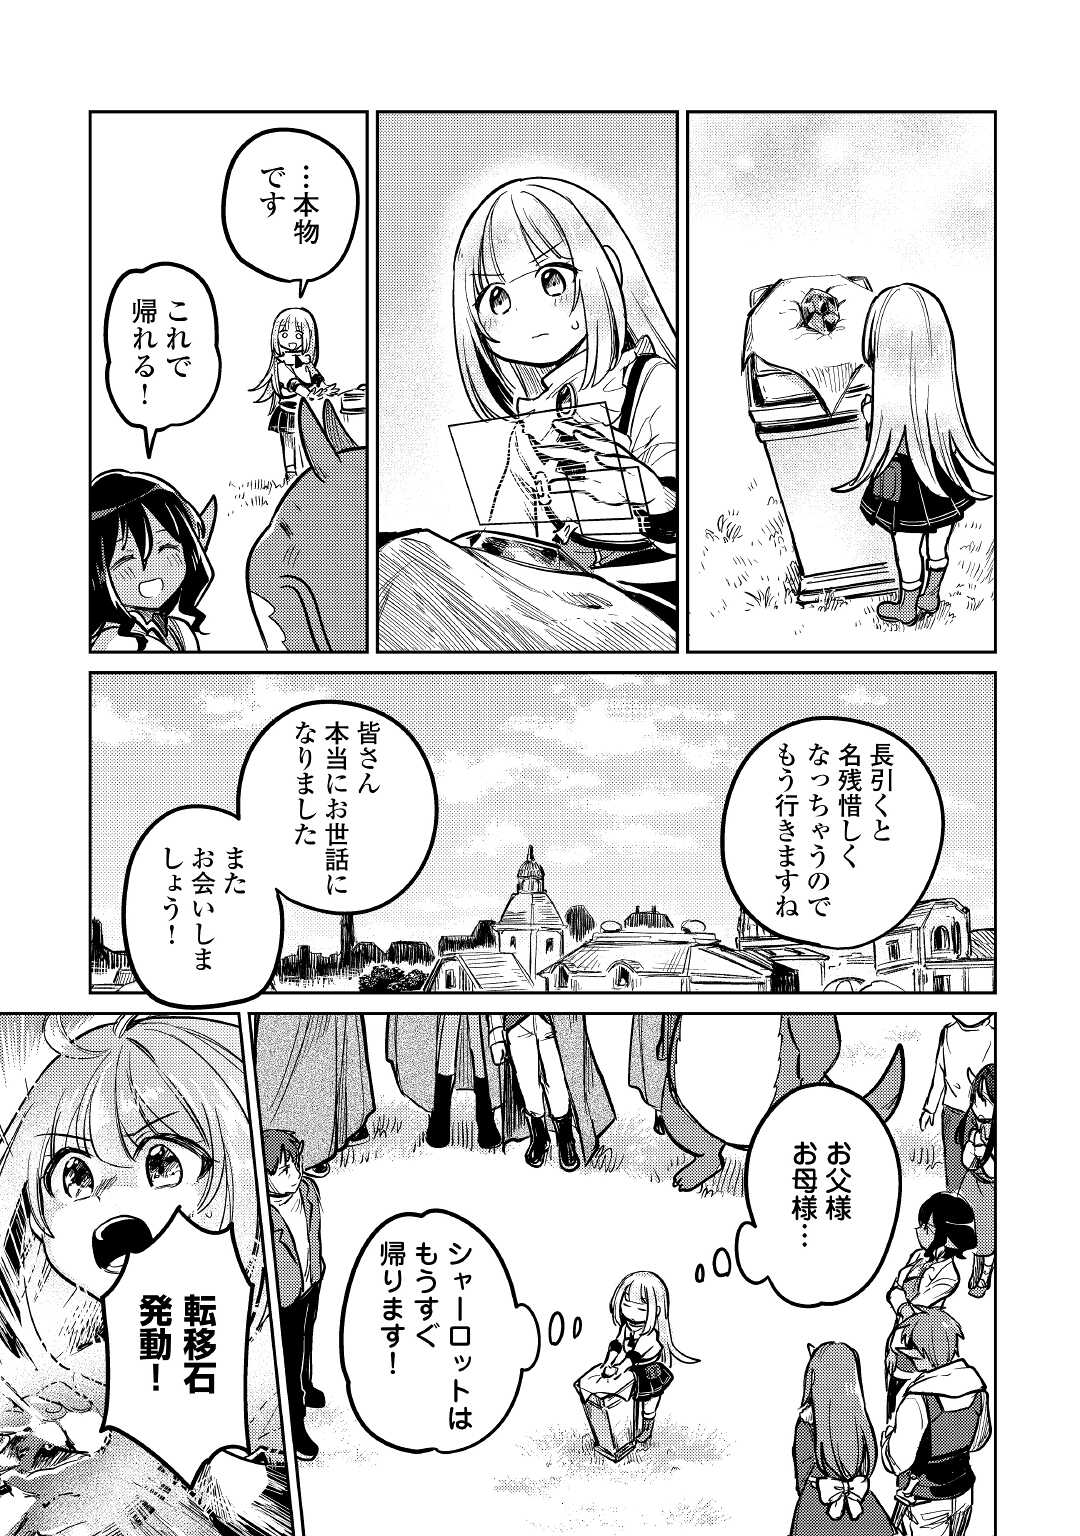 The Former Structural Researcher’s Story of Otherworldly Adventure 第41話 - Page 17